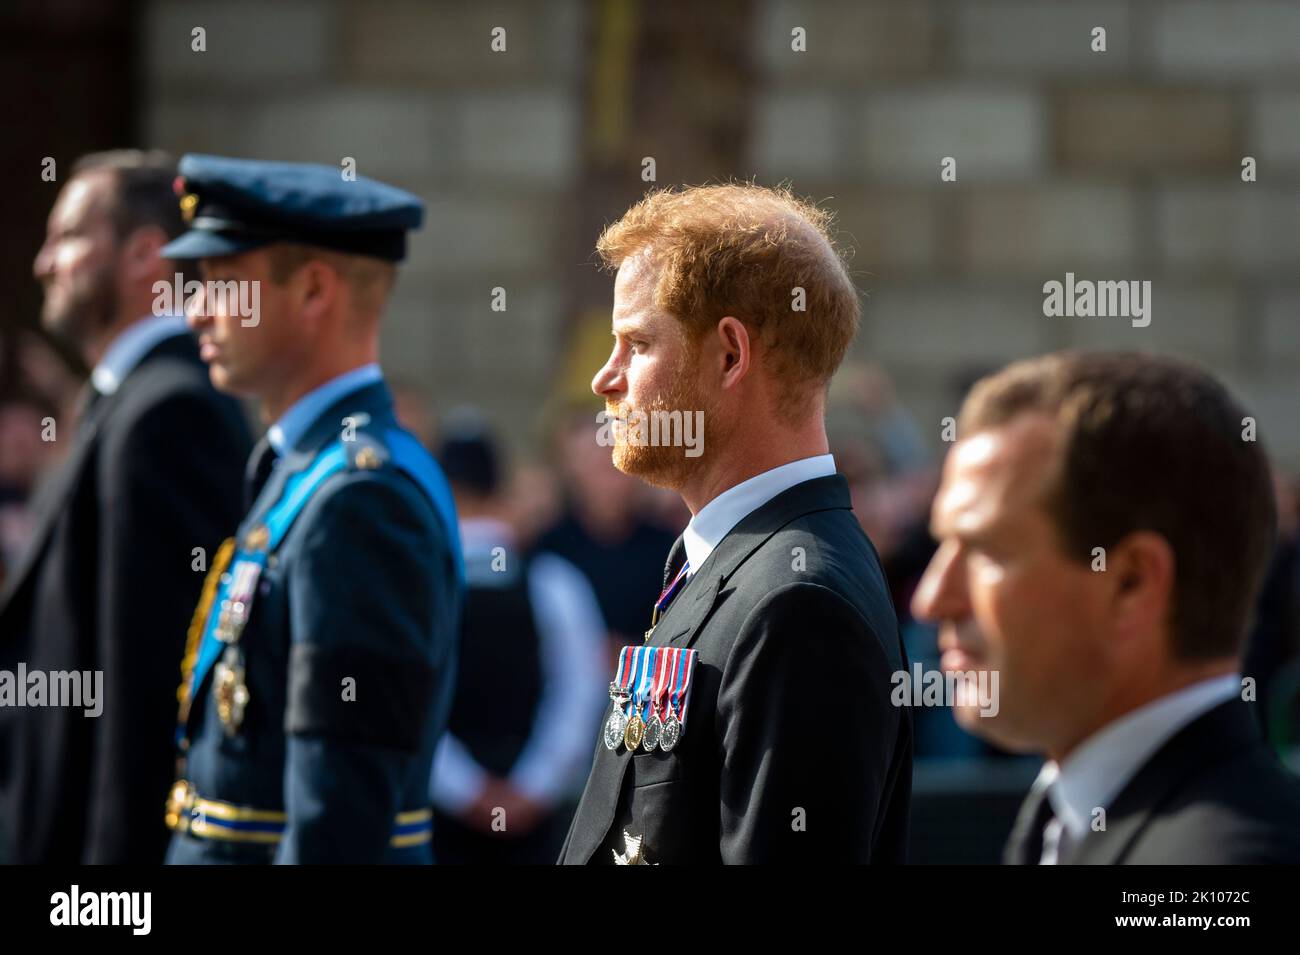 London, UK.  14 September 2022. Prince William, Prince Harry and Peter Phillips follow the late Queen’s coffin carried on a gun carriage in Whitehall en route to Westminster Hall where it will lie in state for four days allowing the public to visit to pay their respects, ahead of the state funeral on 19 September.  Queen Elizabeth II, the longest-reigning monarch in British history, died at the age of 96 in Balmoral, Scotland and her son, now known as King Charles III, has succeeded her.  Credit: Stephen Chung / Alamy Live News Stock Photo